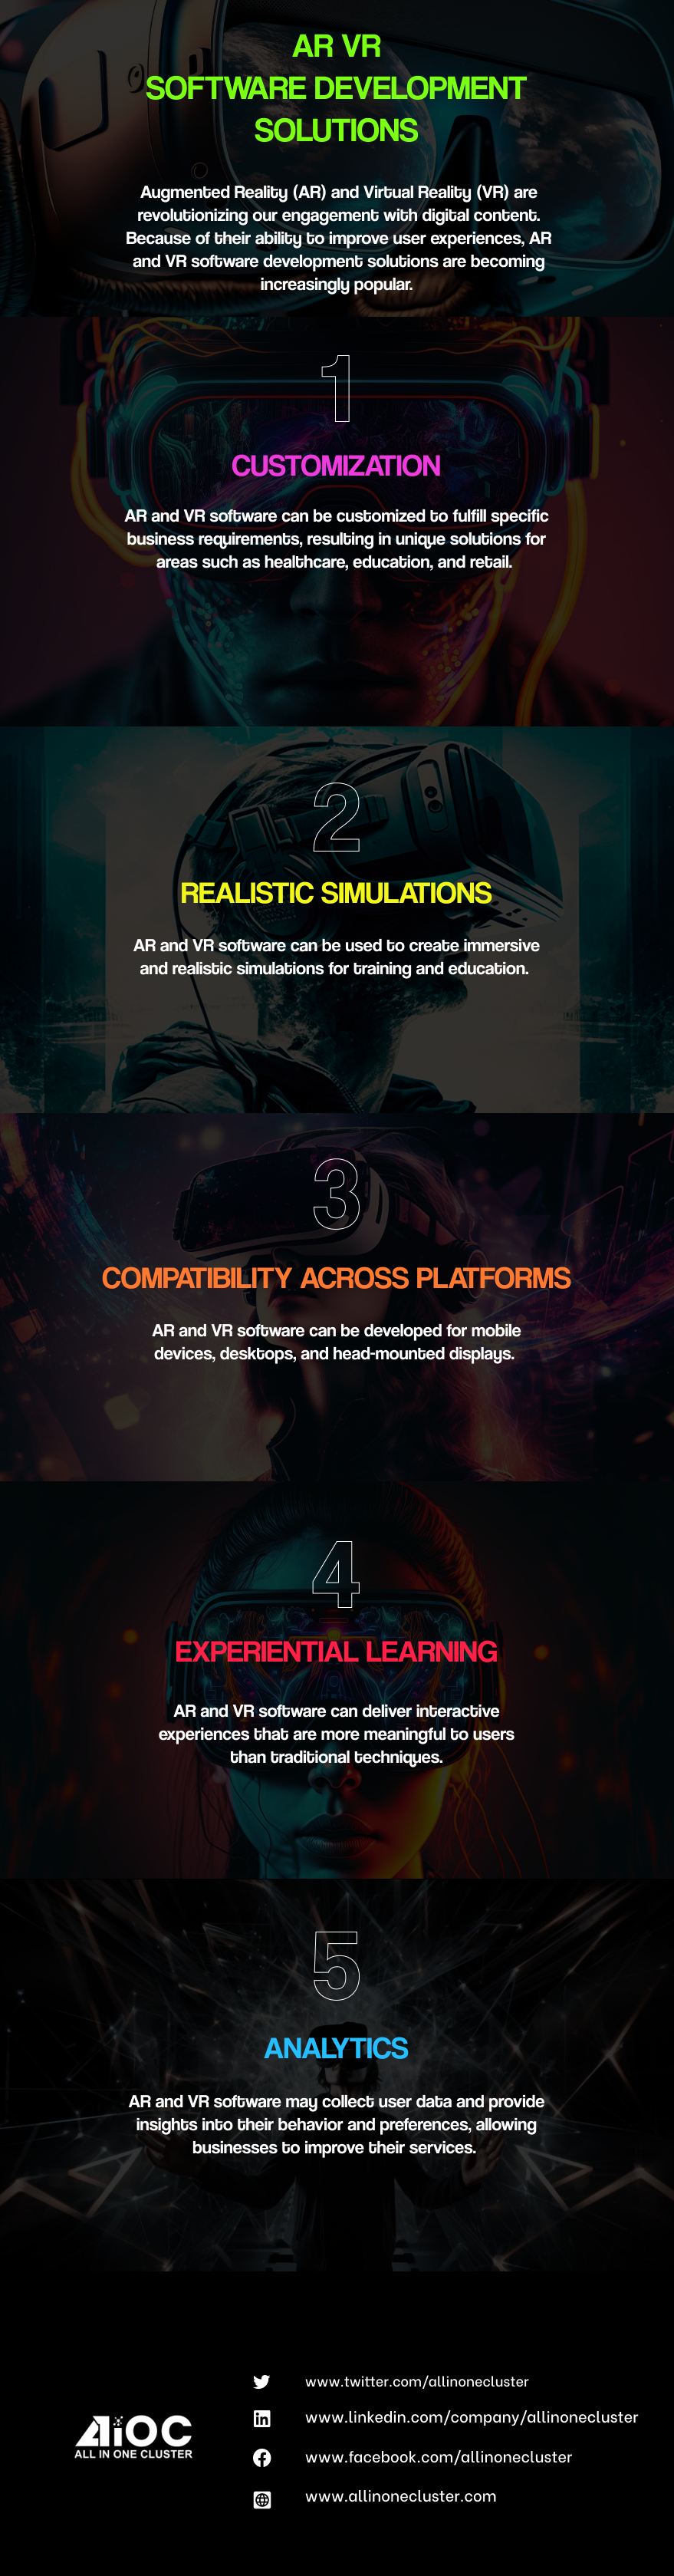 AR VR software Development Solutions #Infographic